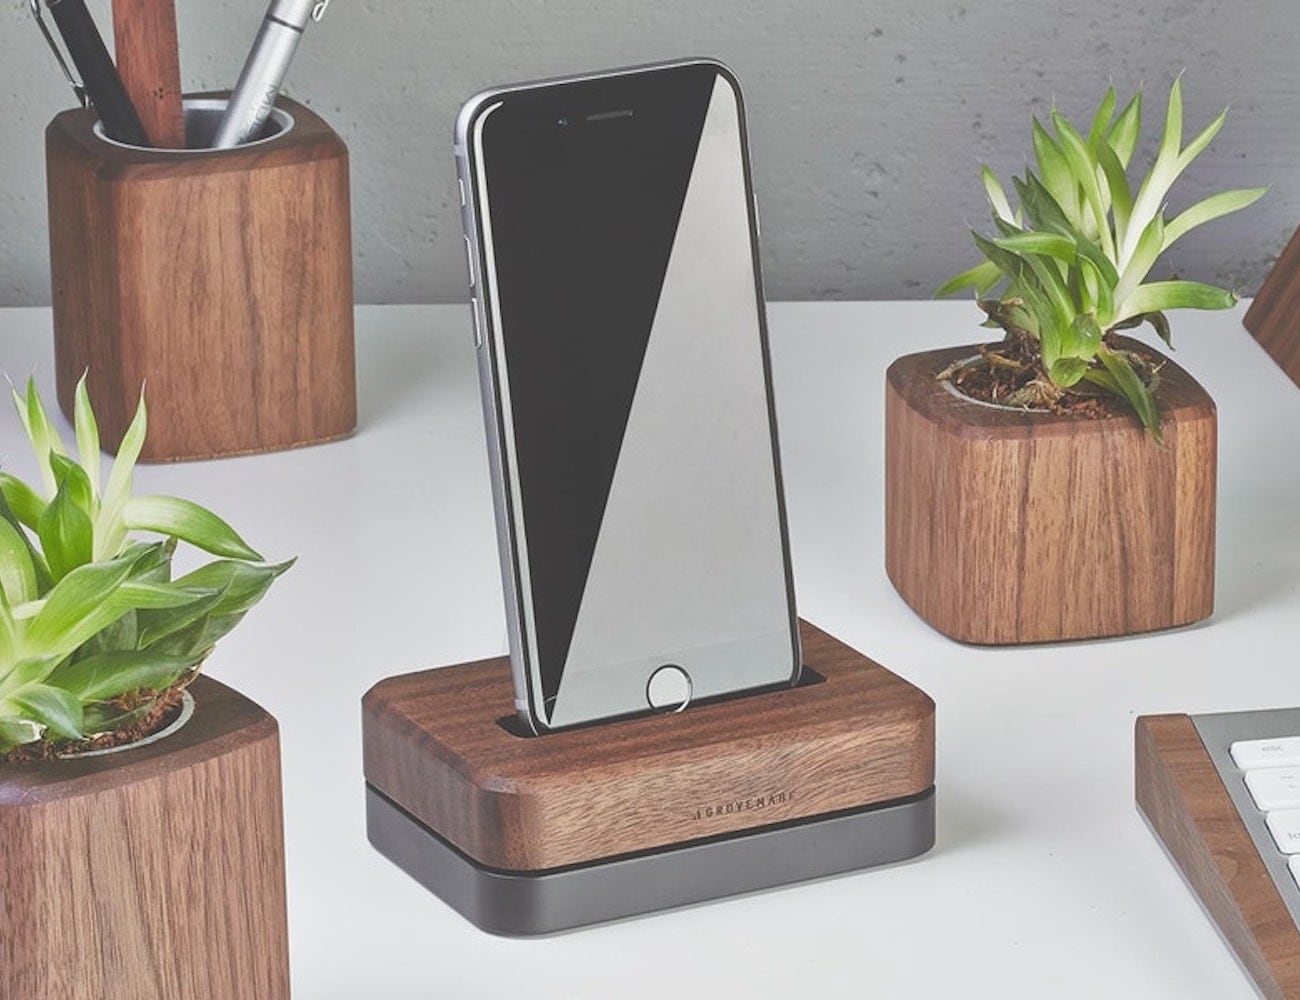 Grovemade Wooden iPhone Docking Station